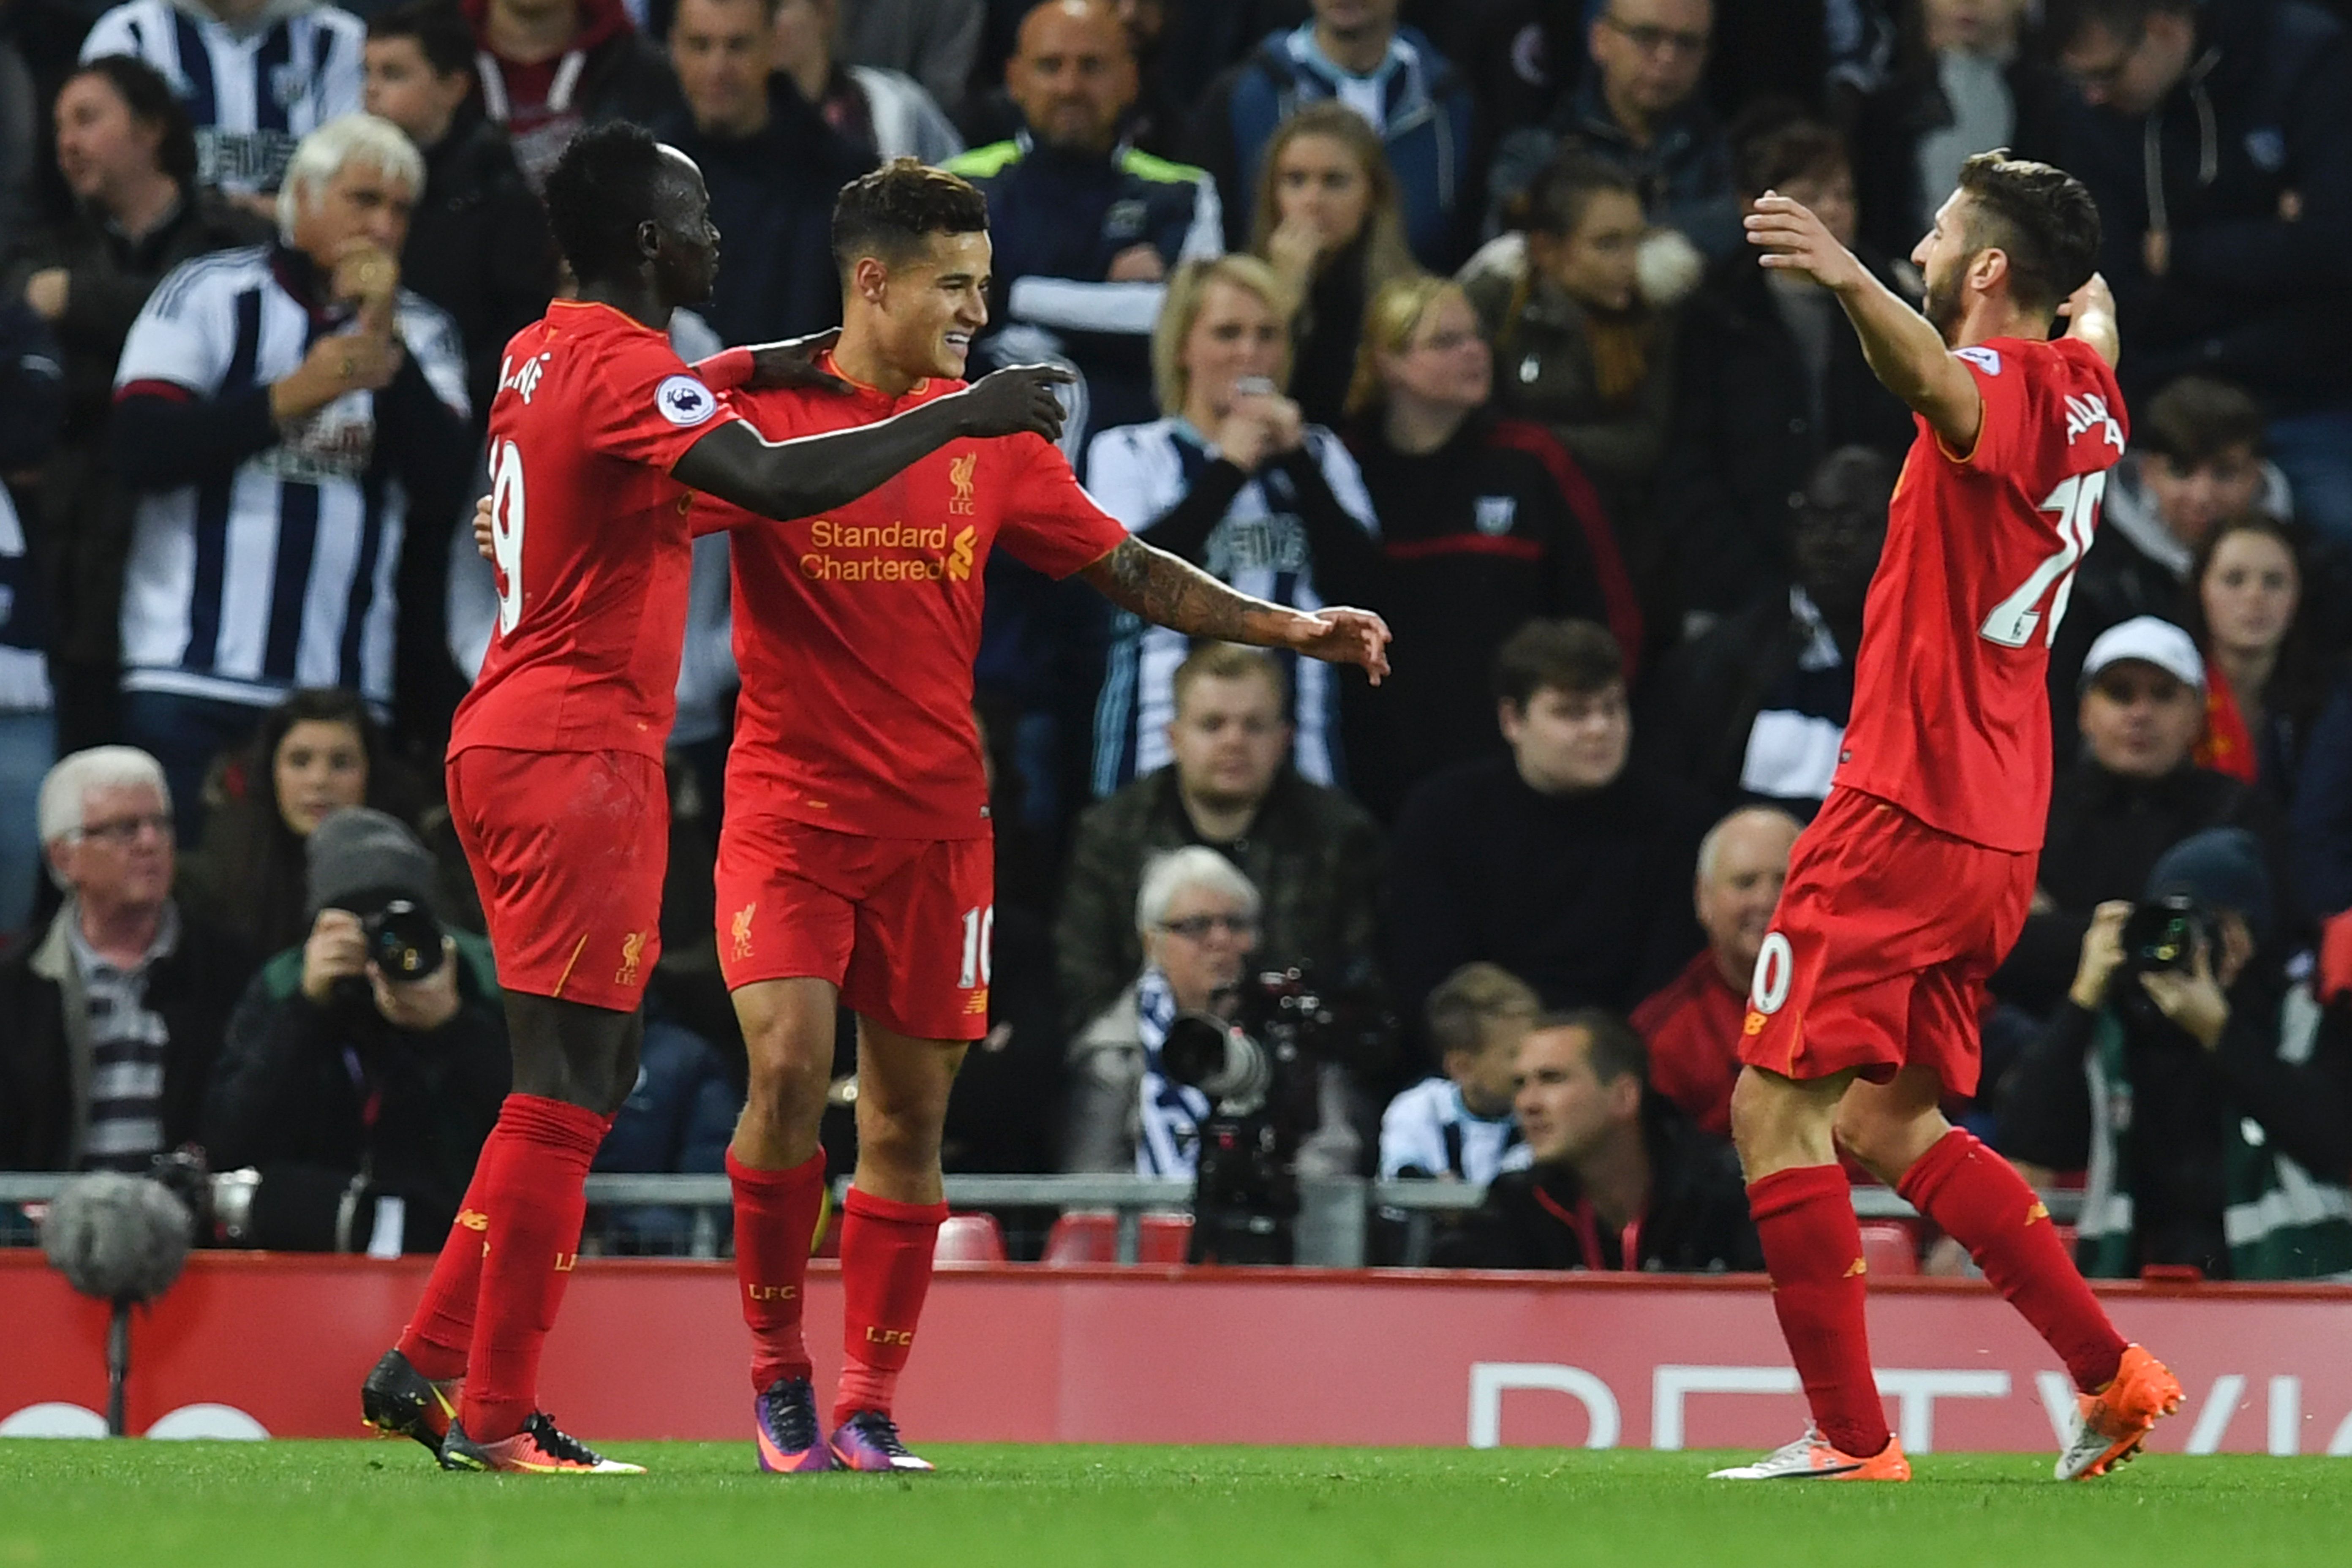 Liverpool's Brazilian midfielder Philippe Coutinho (C) celebrates scoring their second goal with Liverpool's Senegalese midfielder Sadio Mane (L) and Liverpool's English midfielder Adam Lallana (R) during the English Premier League football match between Liverpool and West Bromwich Albion at Anfield in Liverpool, north west England on October 22, 2016. / AFP / PAUL ELLIS / RESTRICTED TO EDITORIAL USE. No use with unauthorized audio, video, data, fixture lists, club/league logos or 'live' services. Online in-match use limited to 75 images, no video emulation. No use in betting, games or single club/league/player publications.  /         (Photo credit should read PAUL ELLIS/AFP/Getty Images)